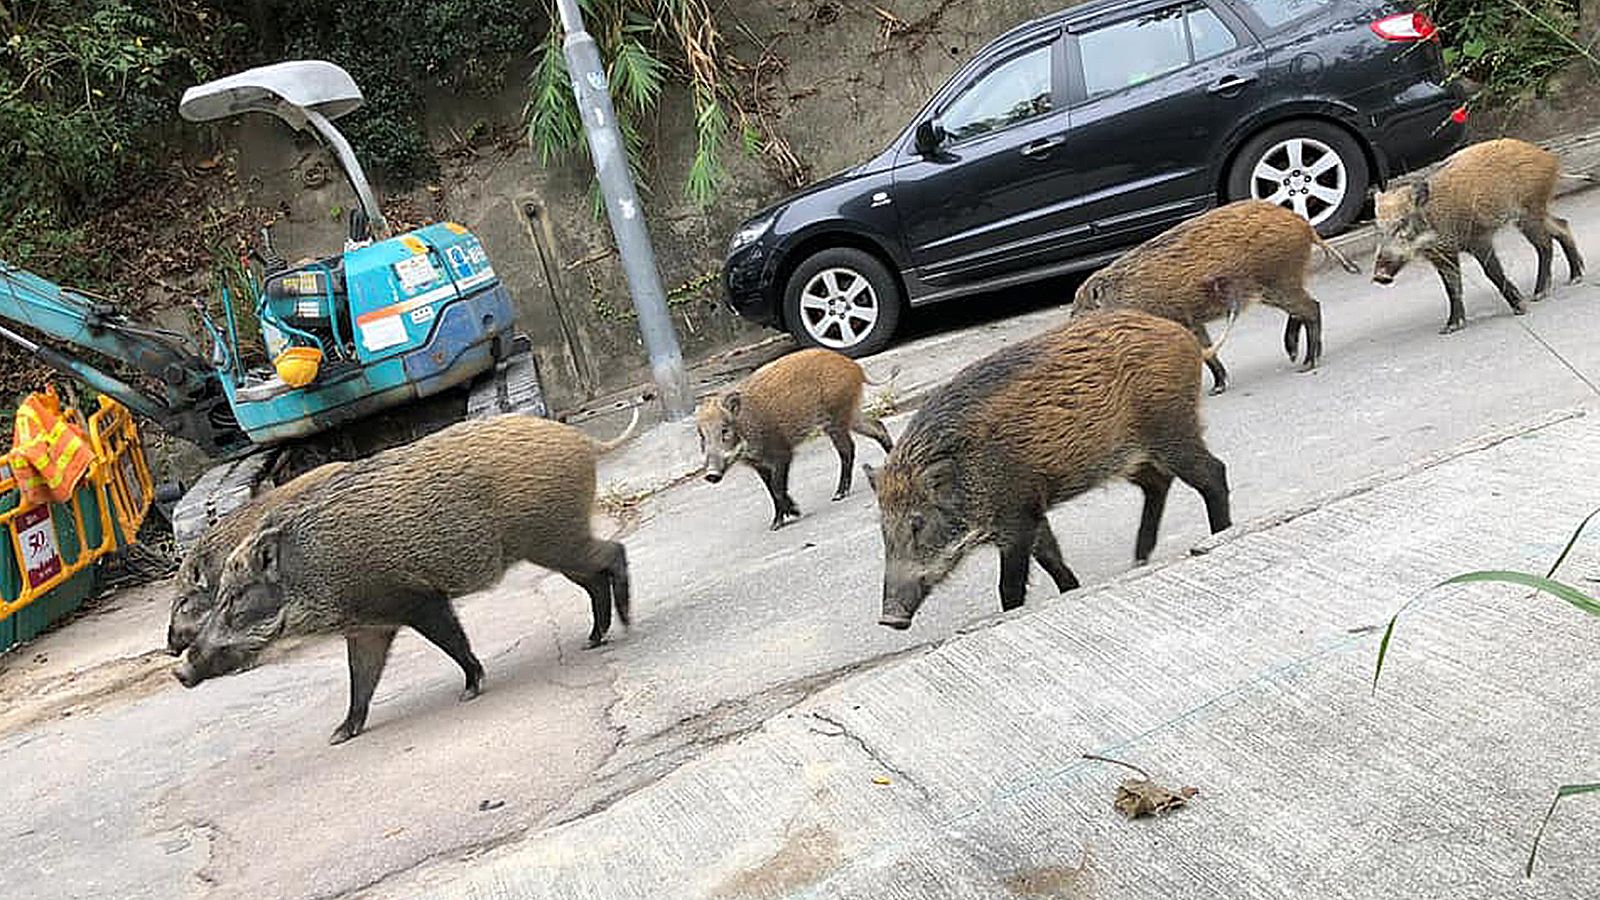 Wild boars in Hong Kong are disrupting the city | CNN